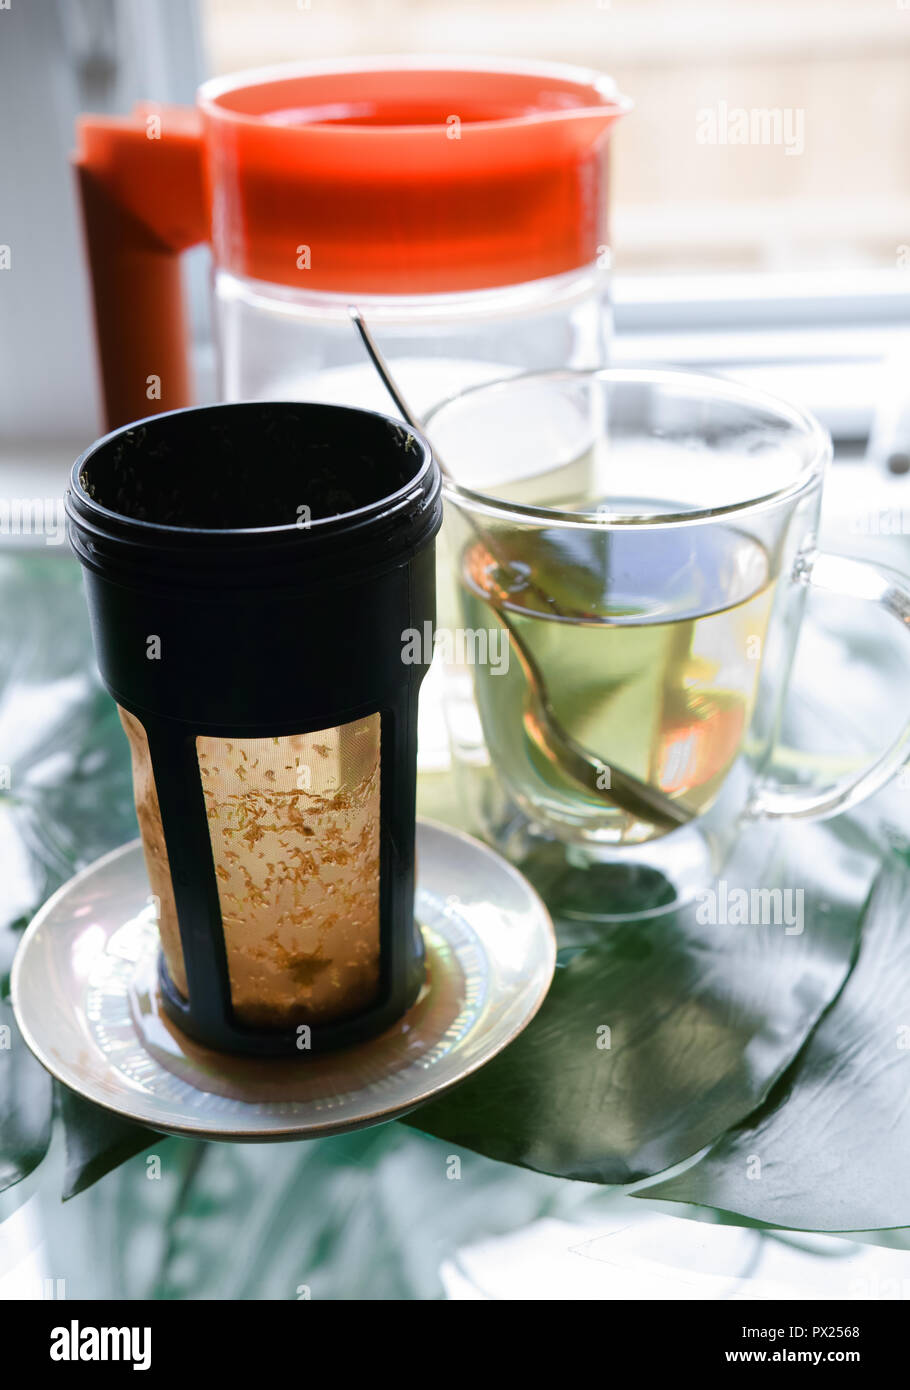 In the foreground there is the tea filter, then we have the transparent glass cup with pale tea in it and the spoon. Behind, we have a transparent pot Stock Photo